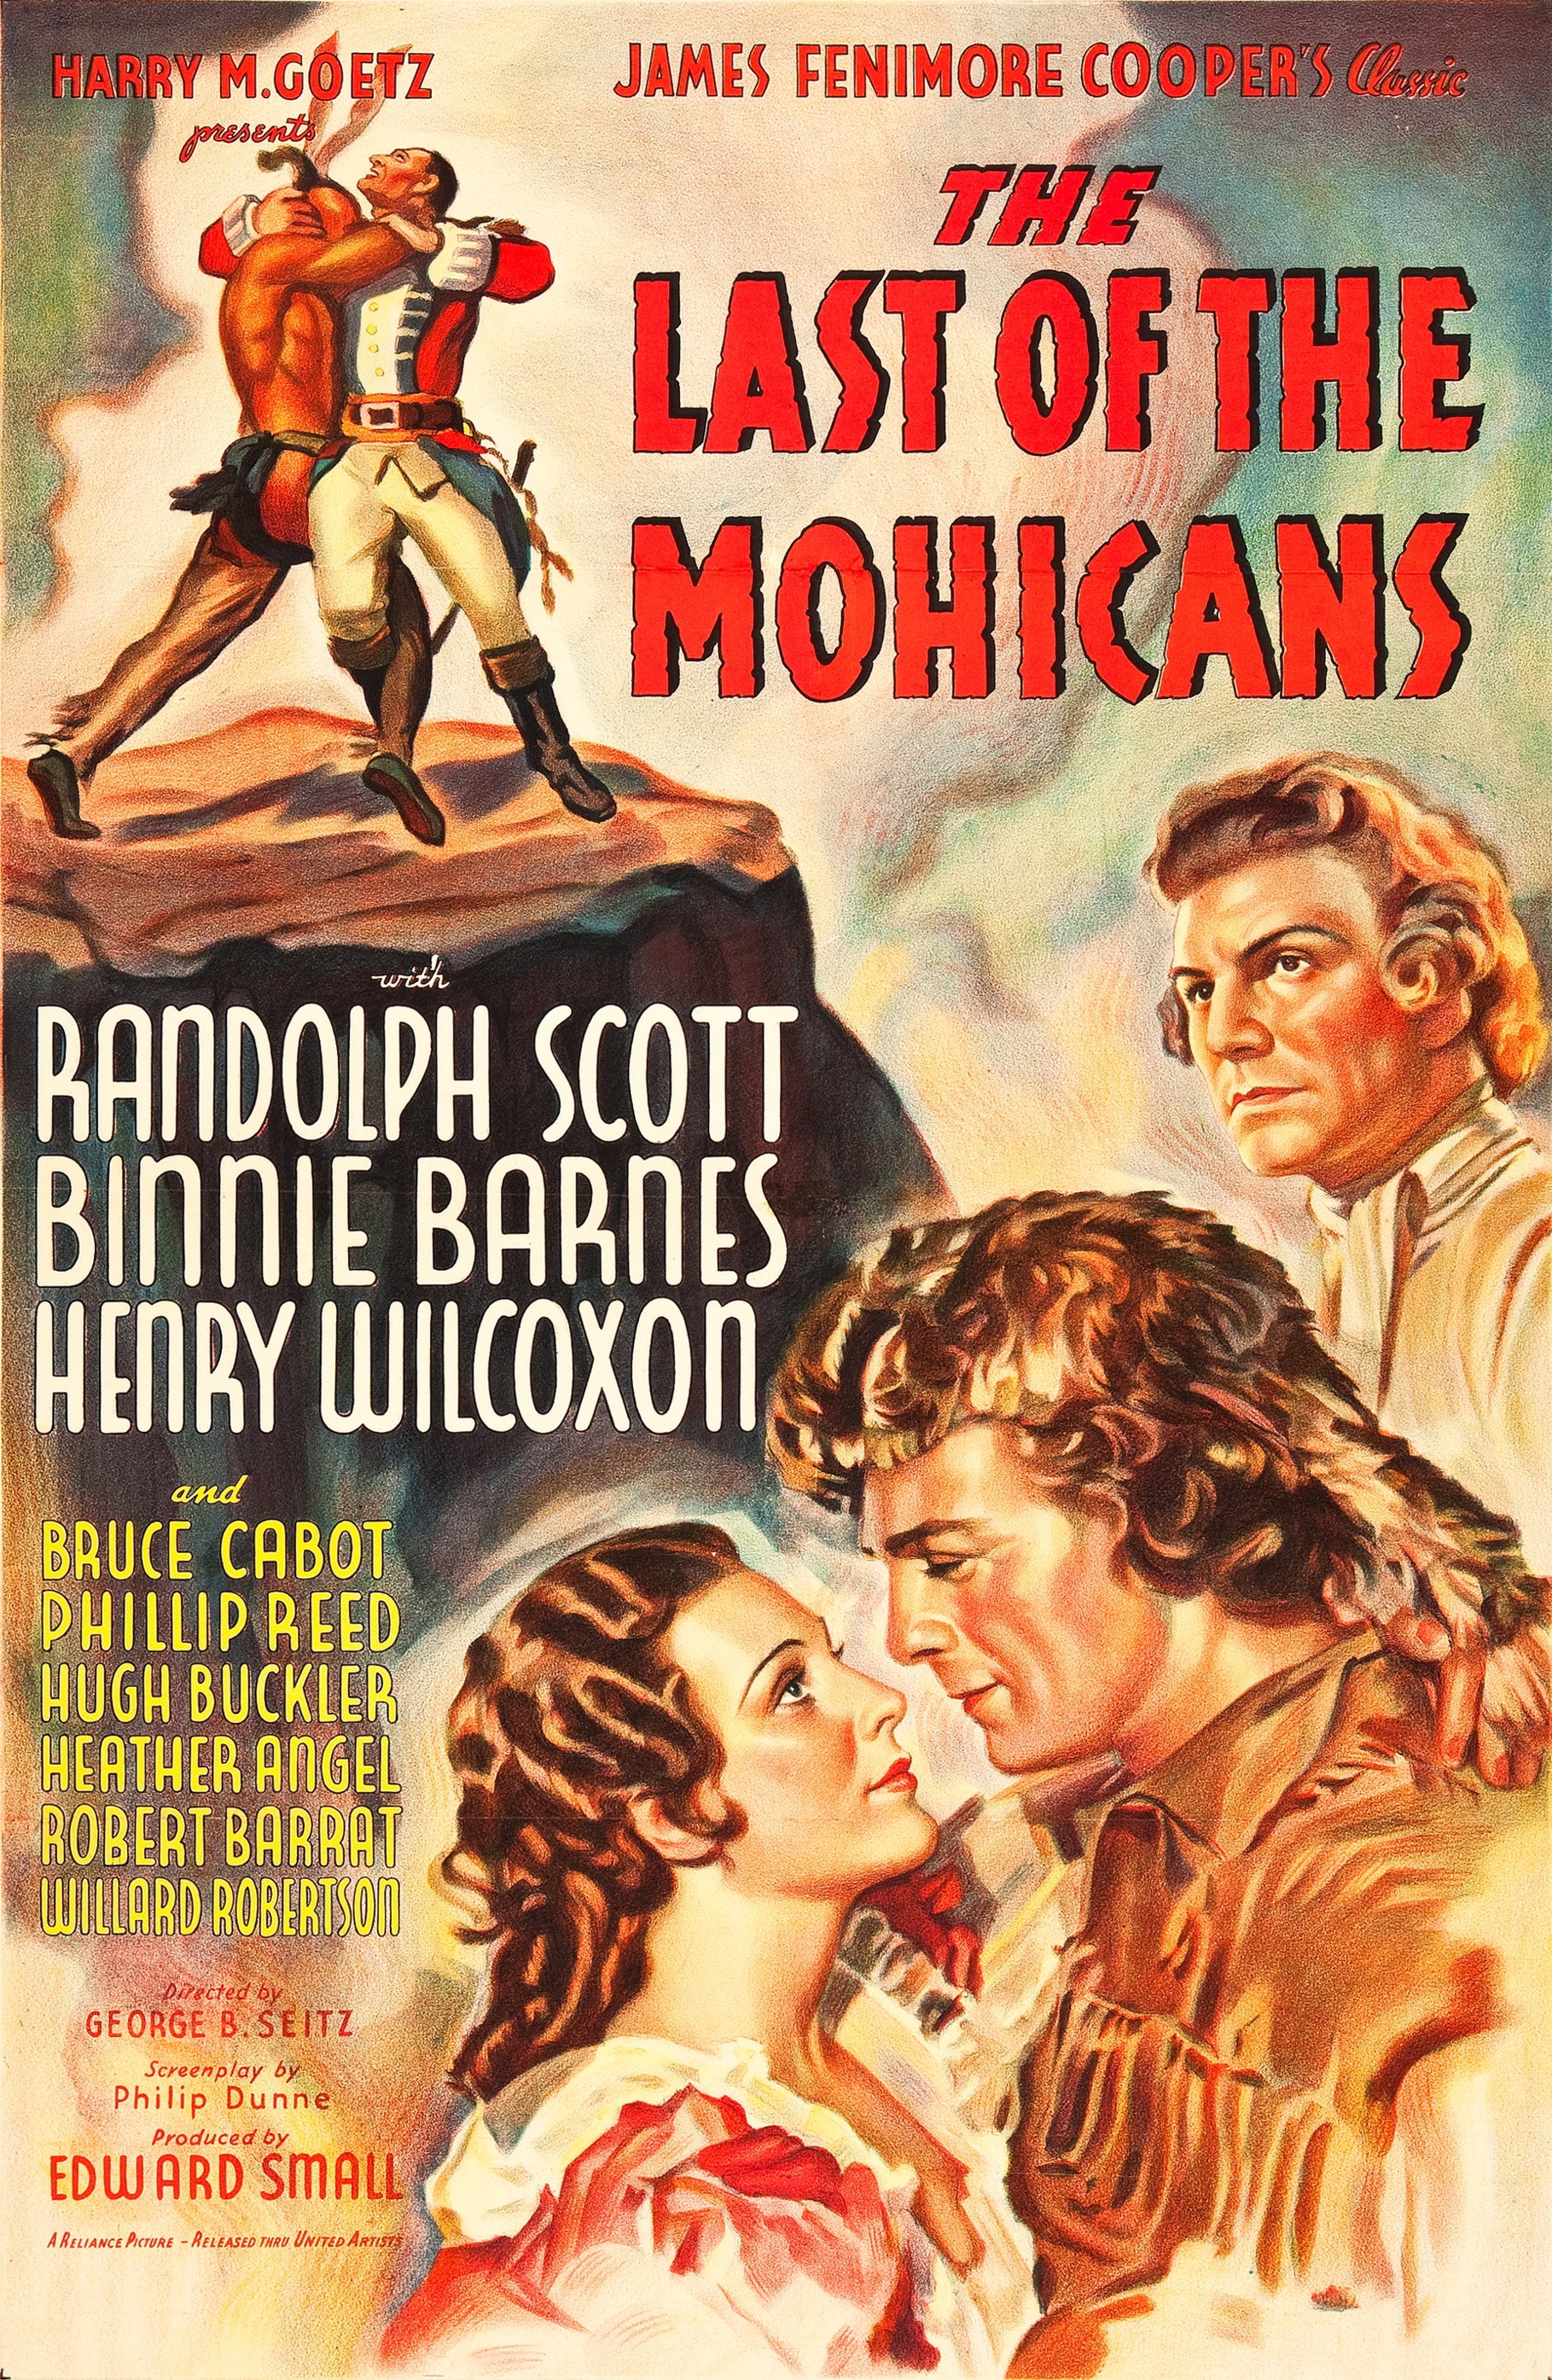 The Last of the Mohicans (1936) starring Randolph Scott on DVD on DVD